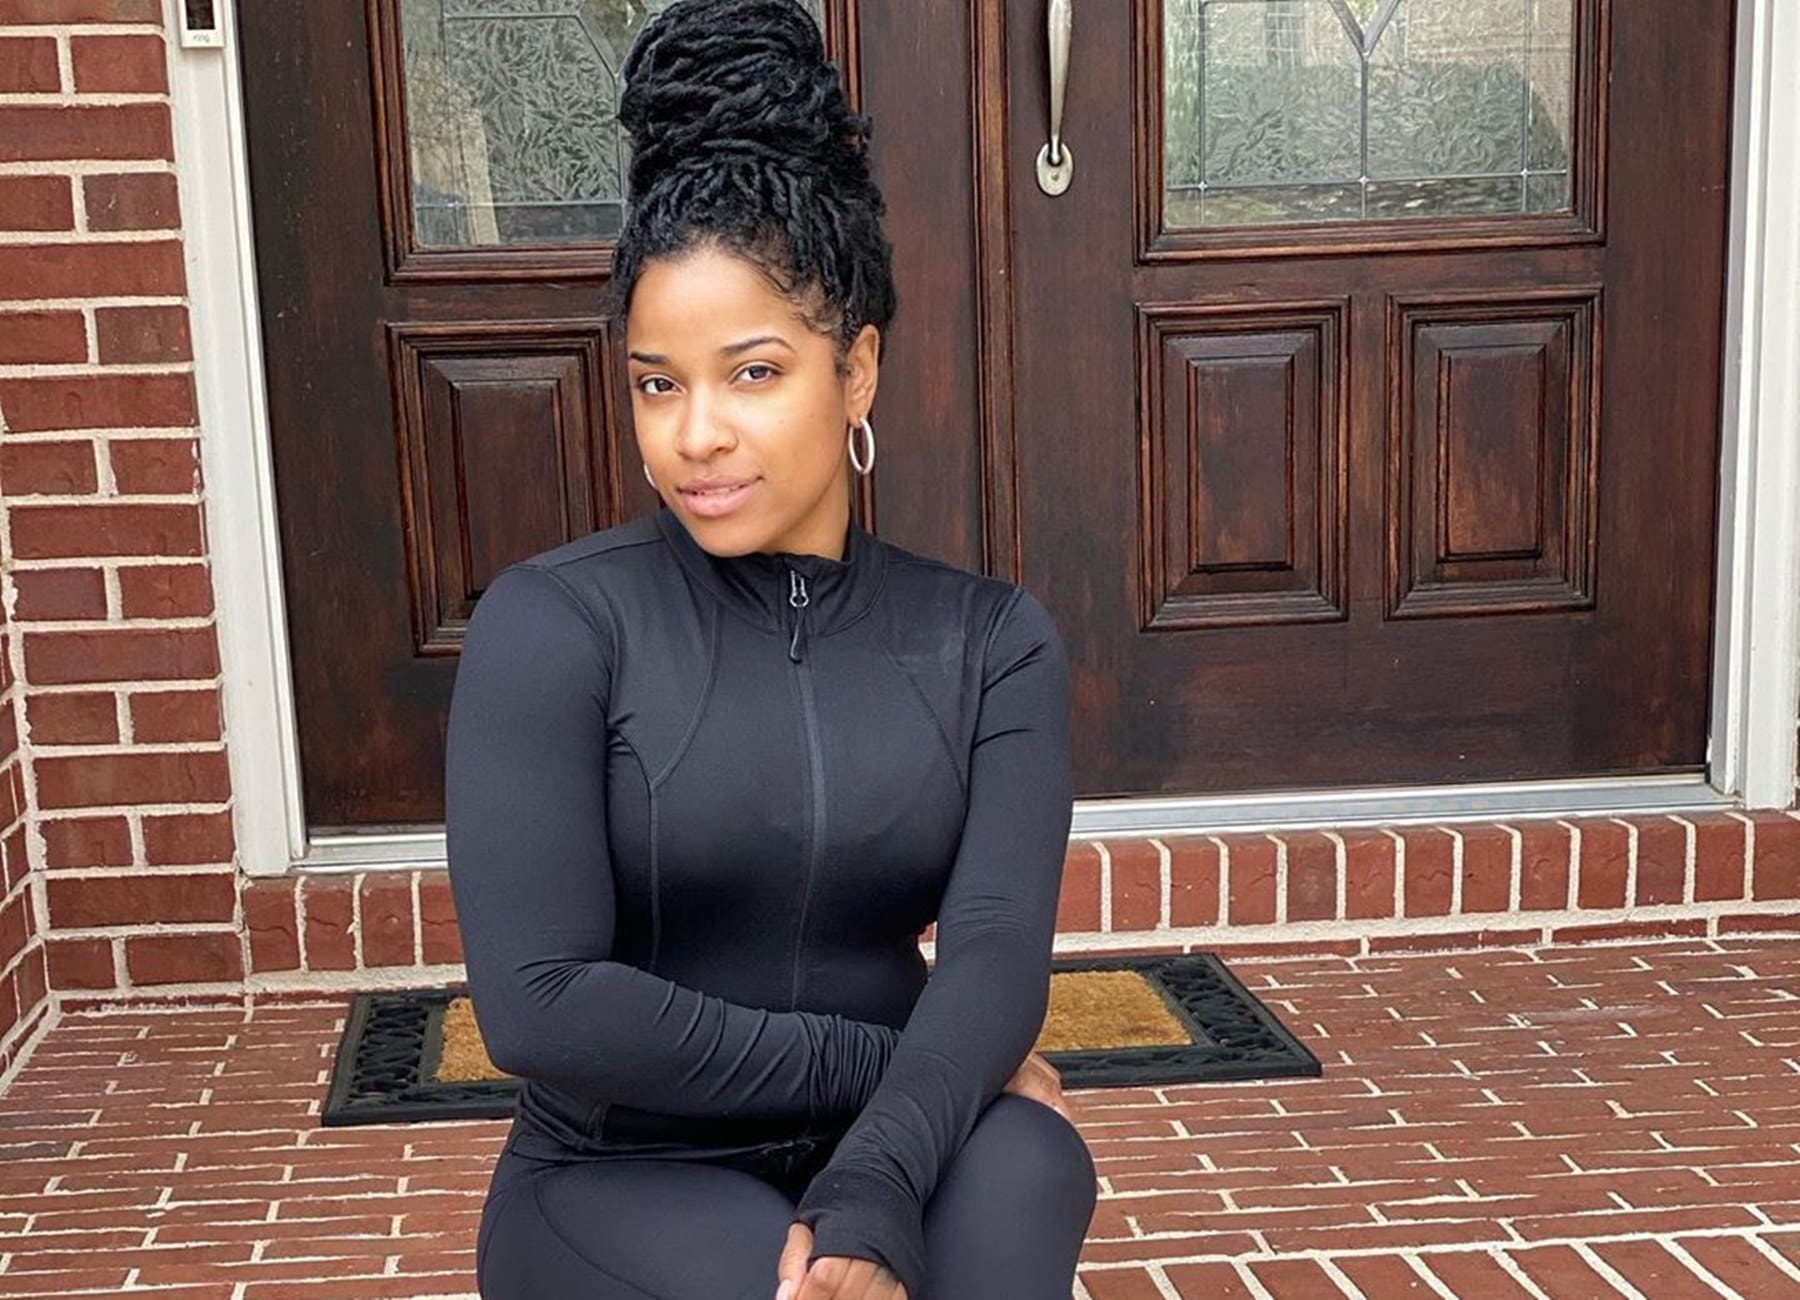 toya-johnson-celebrates-the-birthday-of-her-mom-check-out-the-message-she-wrote-for-mama-nita